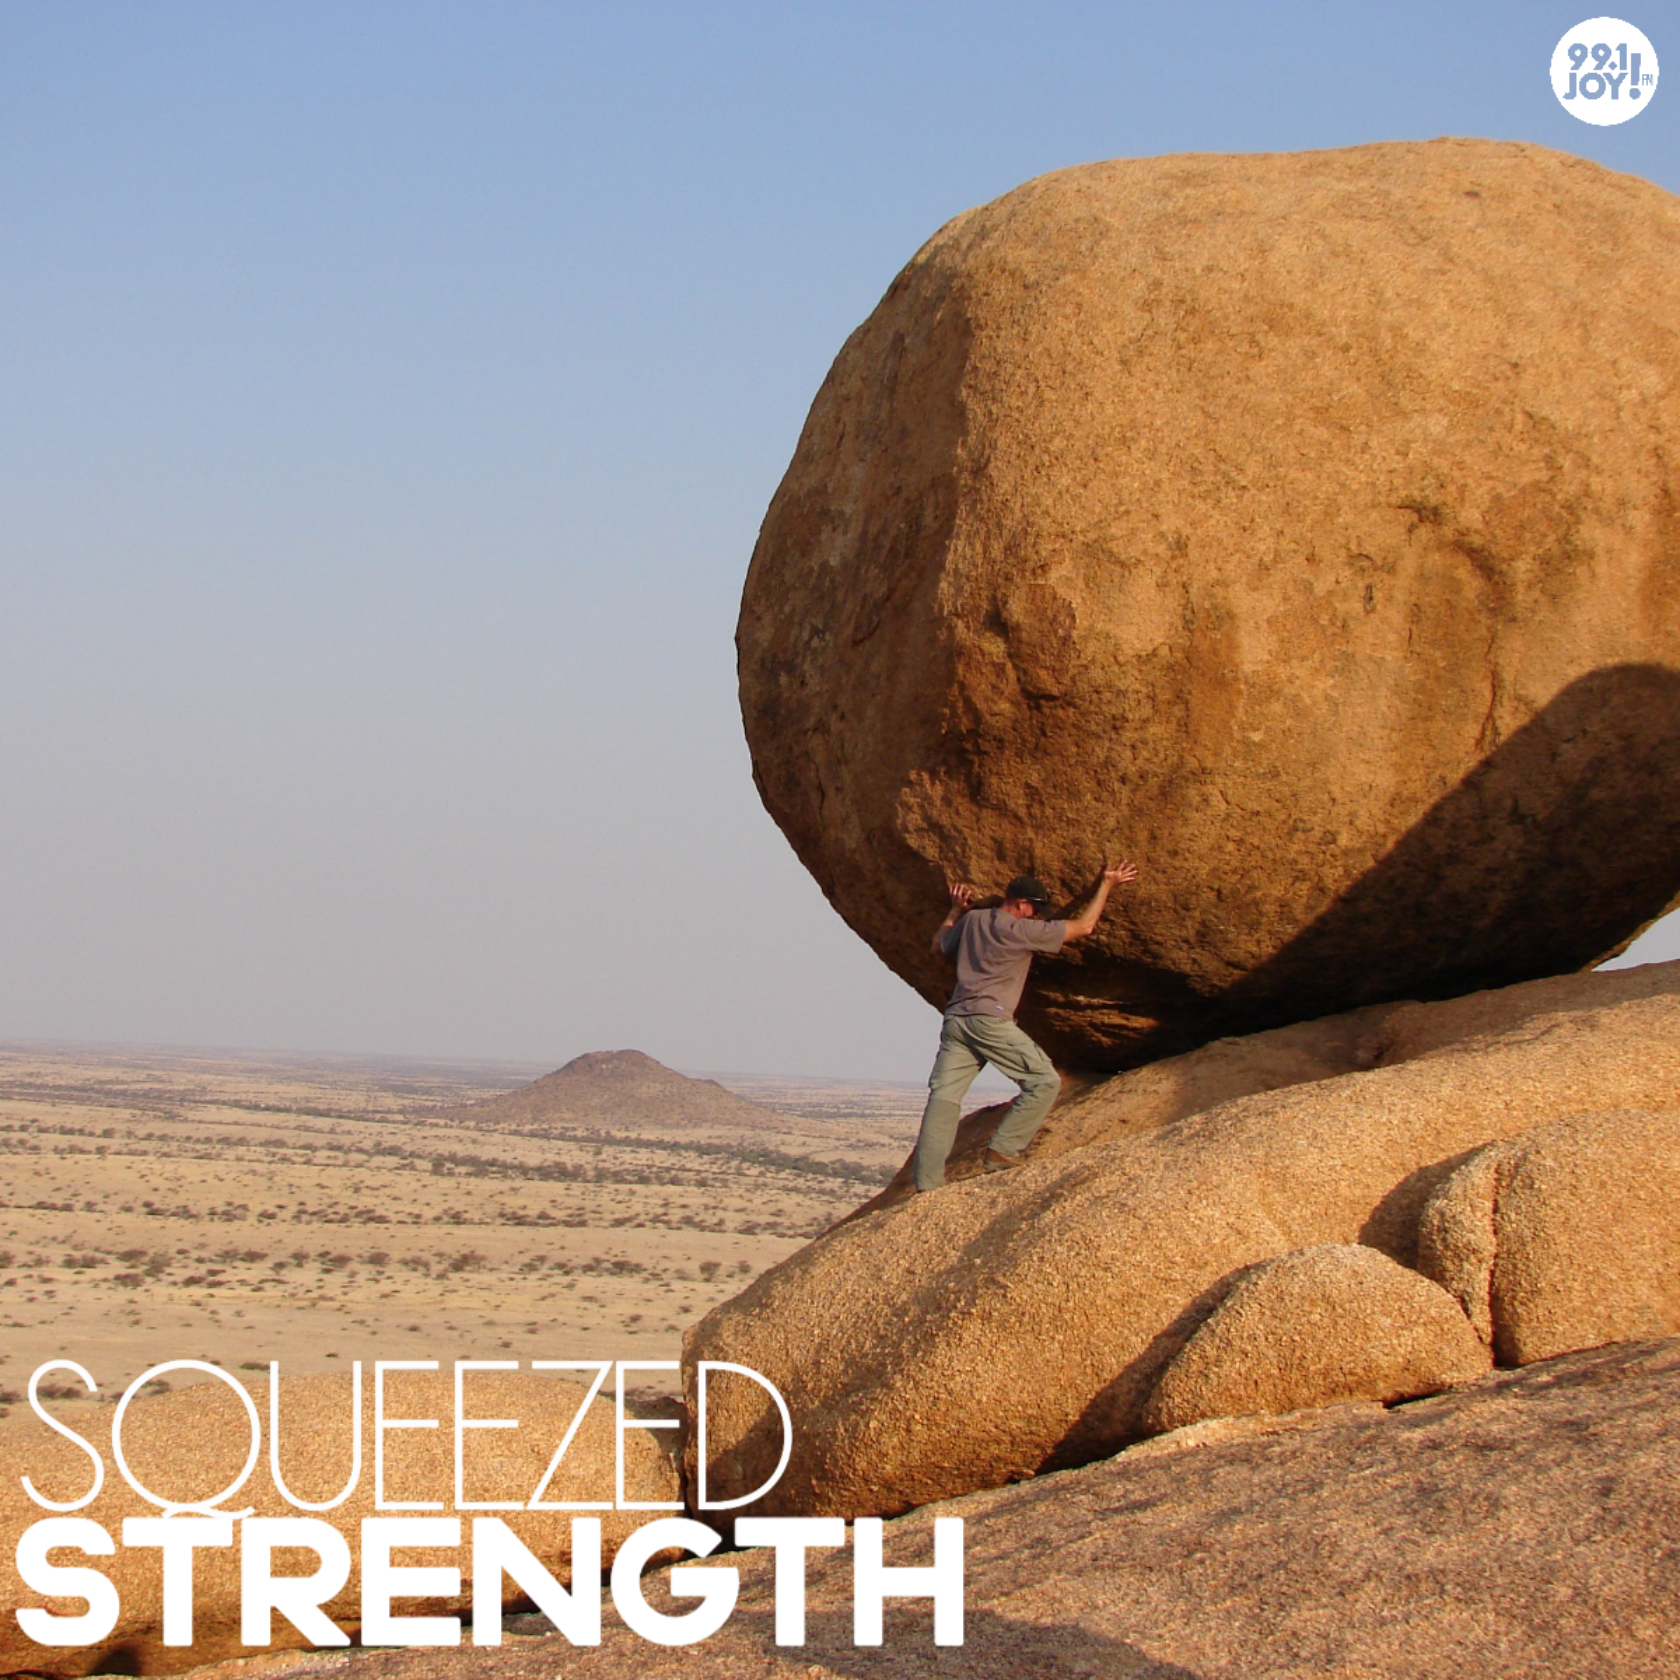 Squeezed Strength